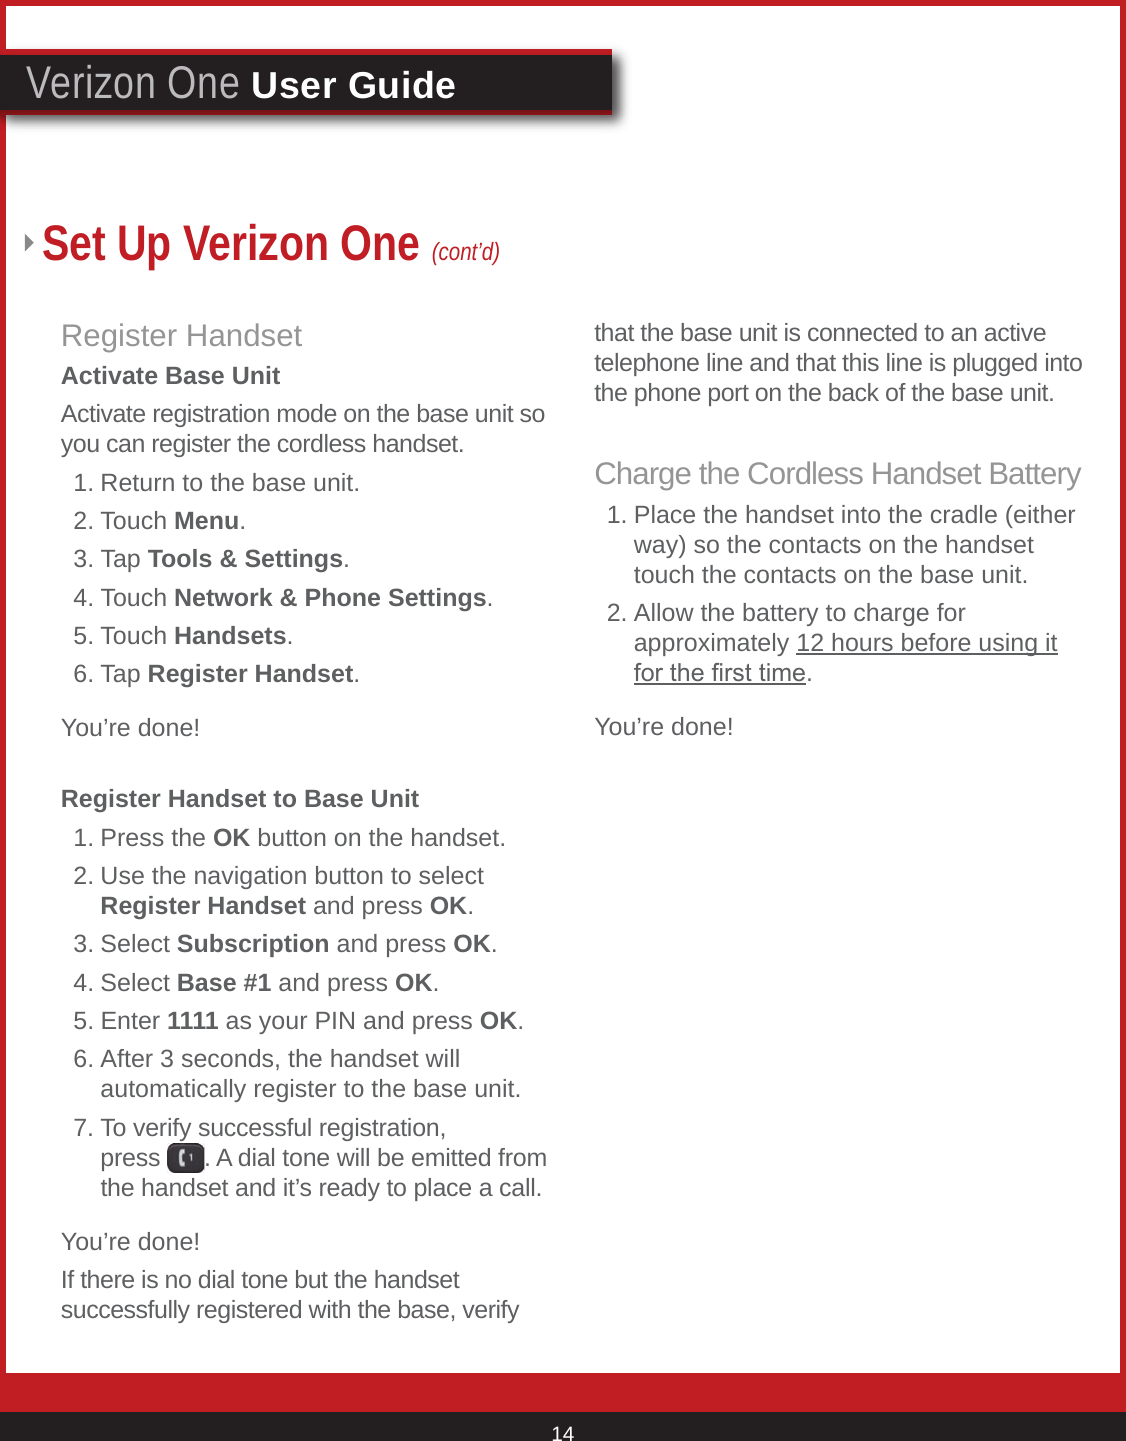 © 2007 Verizon. All Rights Reserved. 14Verizon One User GuideSet Up Verizon One (cont’d)Register HandsetActivate Base UnitActivate registration mode on the base unit so you can register the cordless handset.  1. Return to the base unit.  2. Touch Menu. 3. Tap Tools &amp; Settings.  4. Touch Network &amp; Phone Settings.  5. Touch Handsets.    6. Tap Register Handset.You’re done!Register Handset to Base Unit  1. Press the OK button on the handset.  2. Use the navigation button to select       Register Handset and press OK. 3. Select Subscription and press OK.  4. Select Base #1 and press OK.  5. Enter 1111 as your PIN and press OK.  6. After 3 seconds, the handset will        automatically register to the base unit.   7. To verify successful registration,        press  . A dial tone will be emitted from      the handset and it’s ready to place a call.You’re done!If there is no dial tone but the handset successfully registered with the base, verify that the base unit is connected to an active telephone line and that this line is plugged into the phone port on the back of the base unit.Charge the Cordless Handset Battery  1. Place the handset into the cradle (either      way) so the contacts on the handset      touch the contacts on the base unit.   2. Allow the battery to charge for        approximately 12 hours before using it      for the rst time.You’re done!